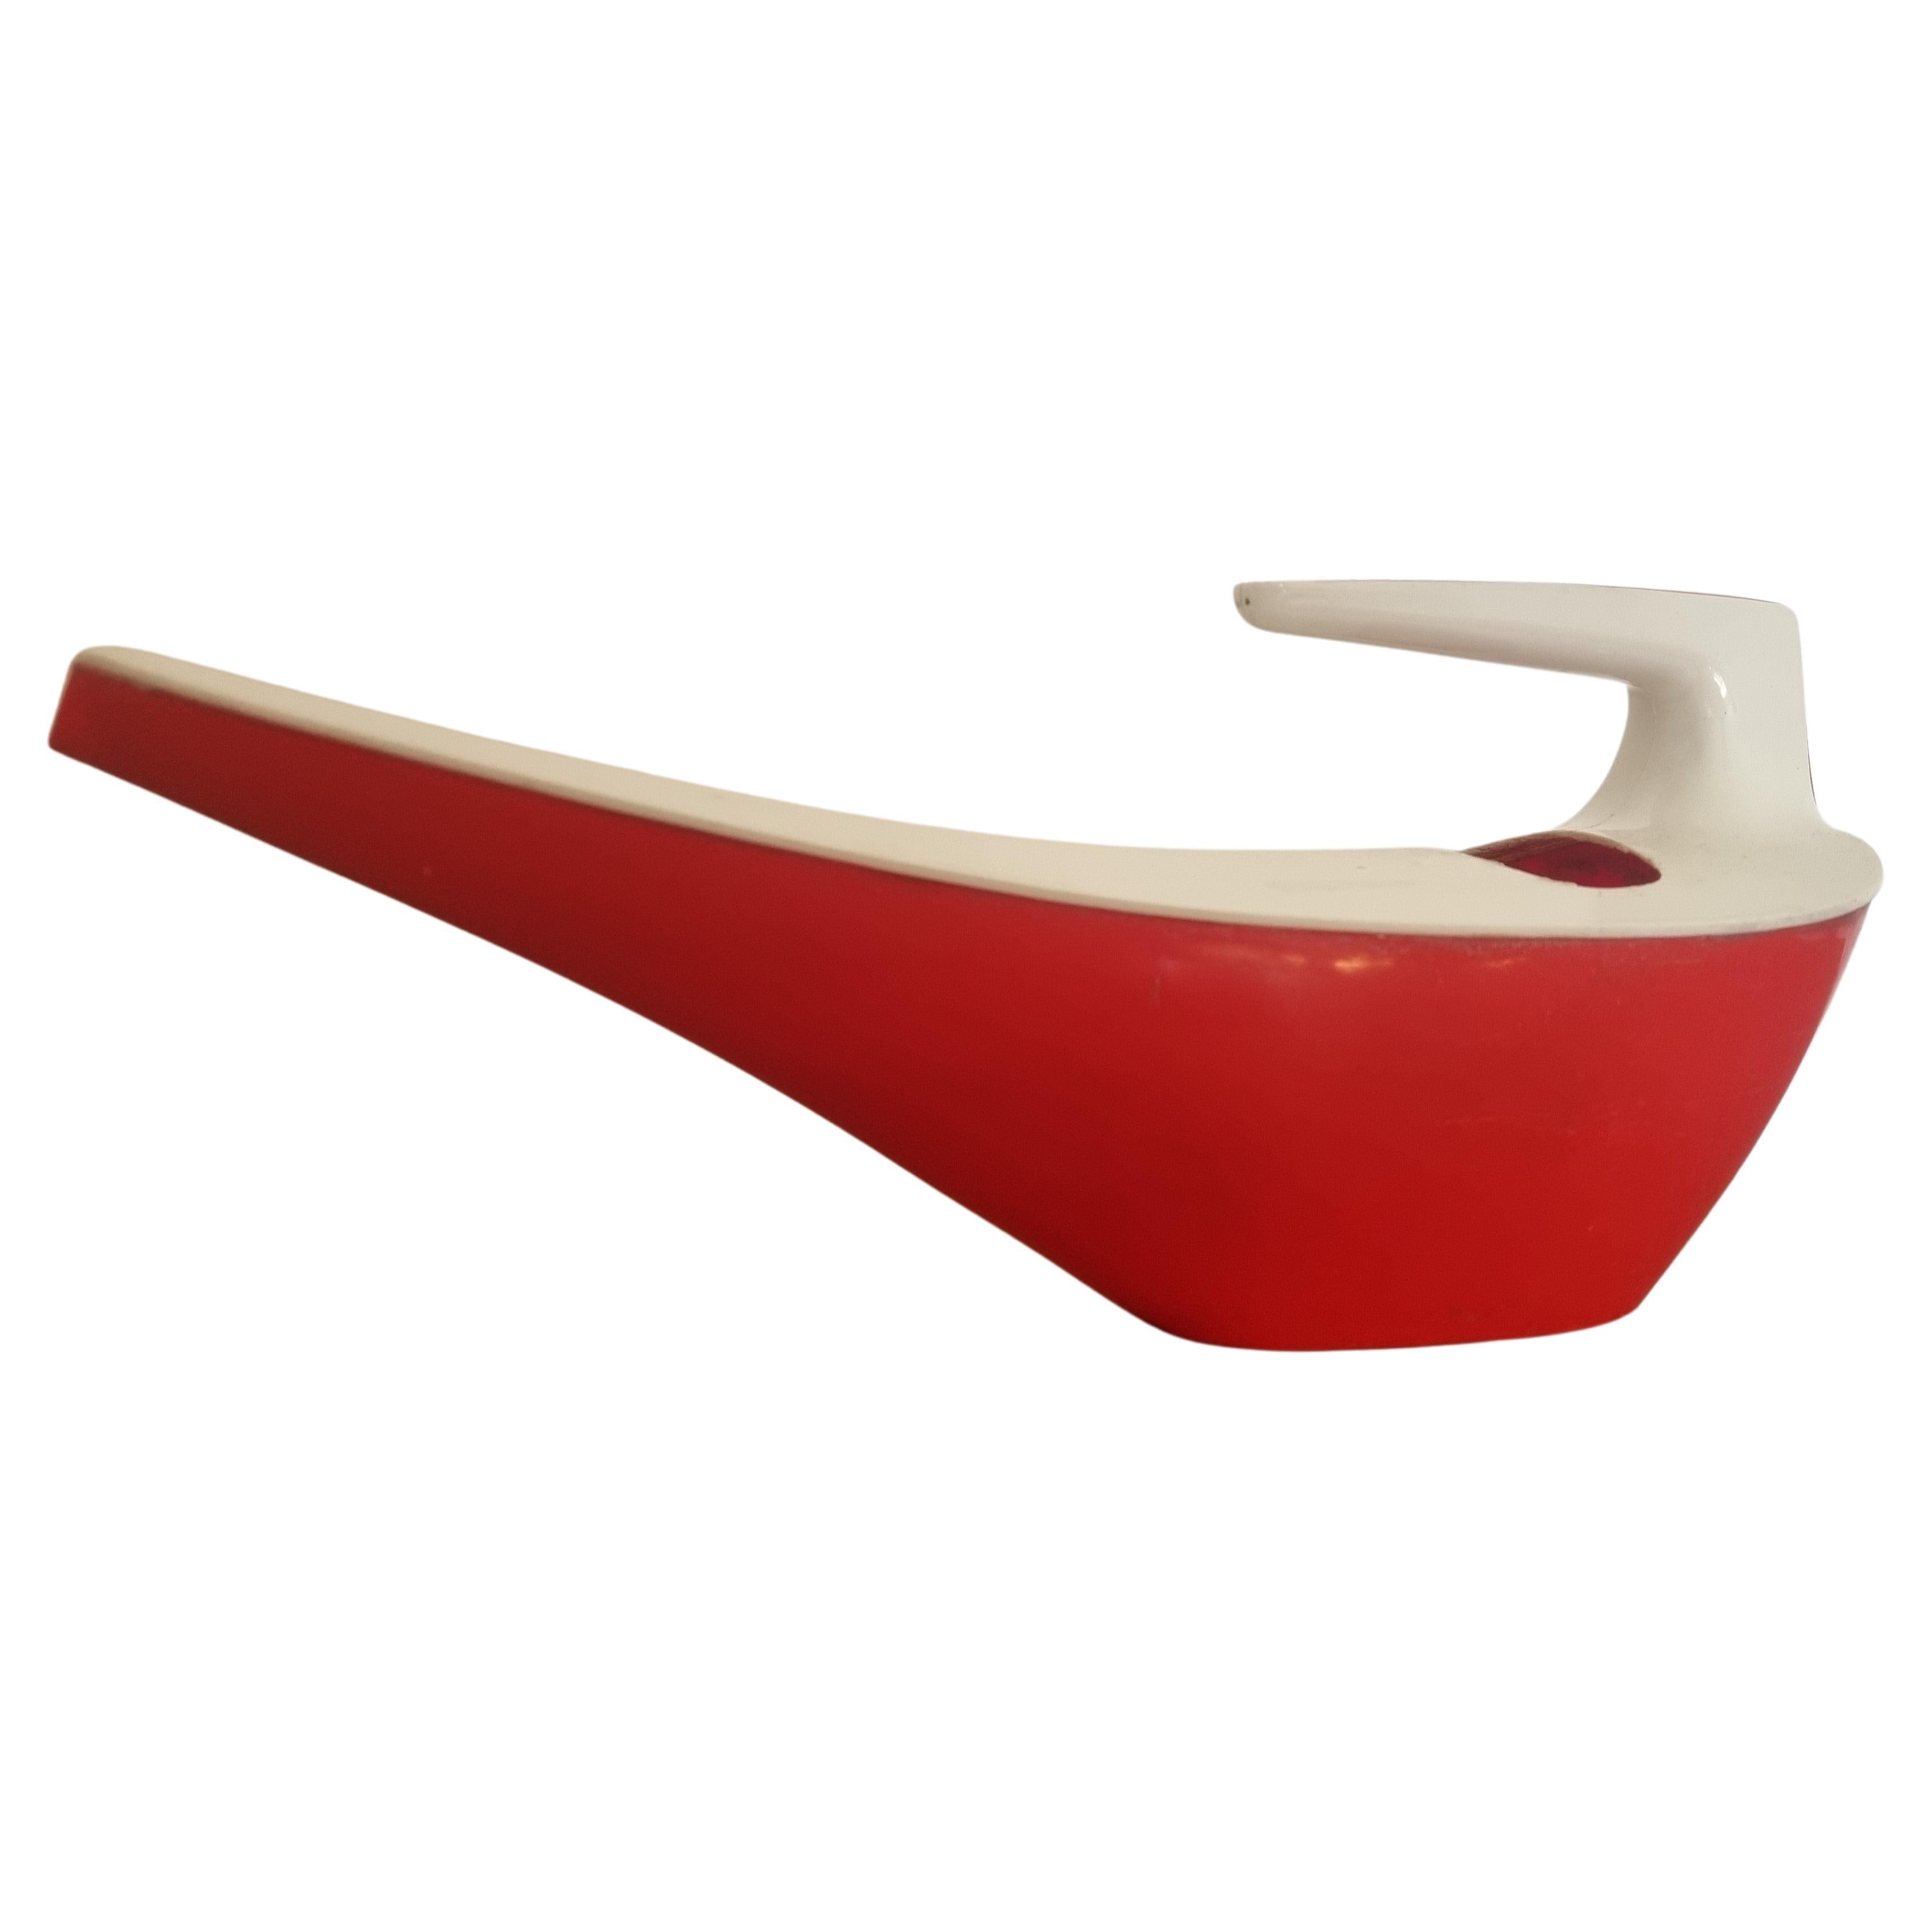 Midcentury Iconic Design Watering Can, Klaus Kunis, Germany, 1960s For Sale